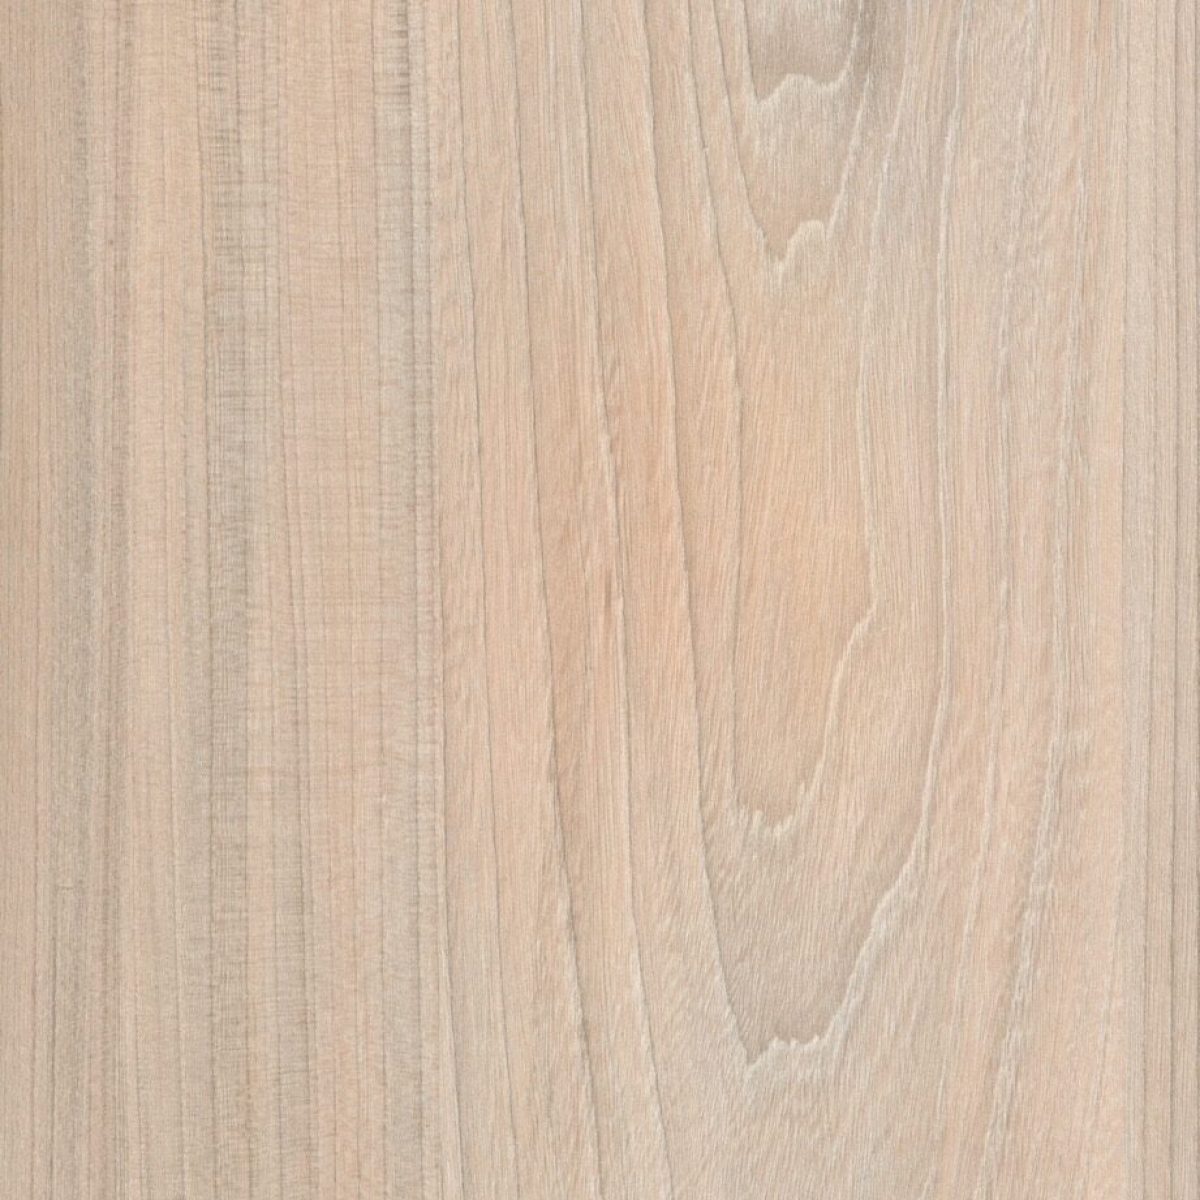 resized-maderas-NATURAL ELM MT 4X8 1499